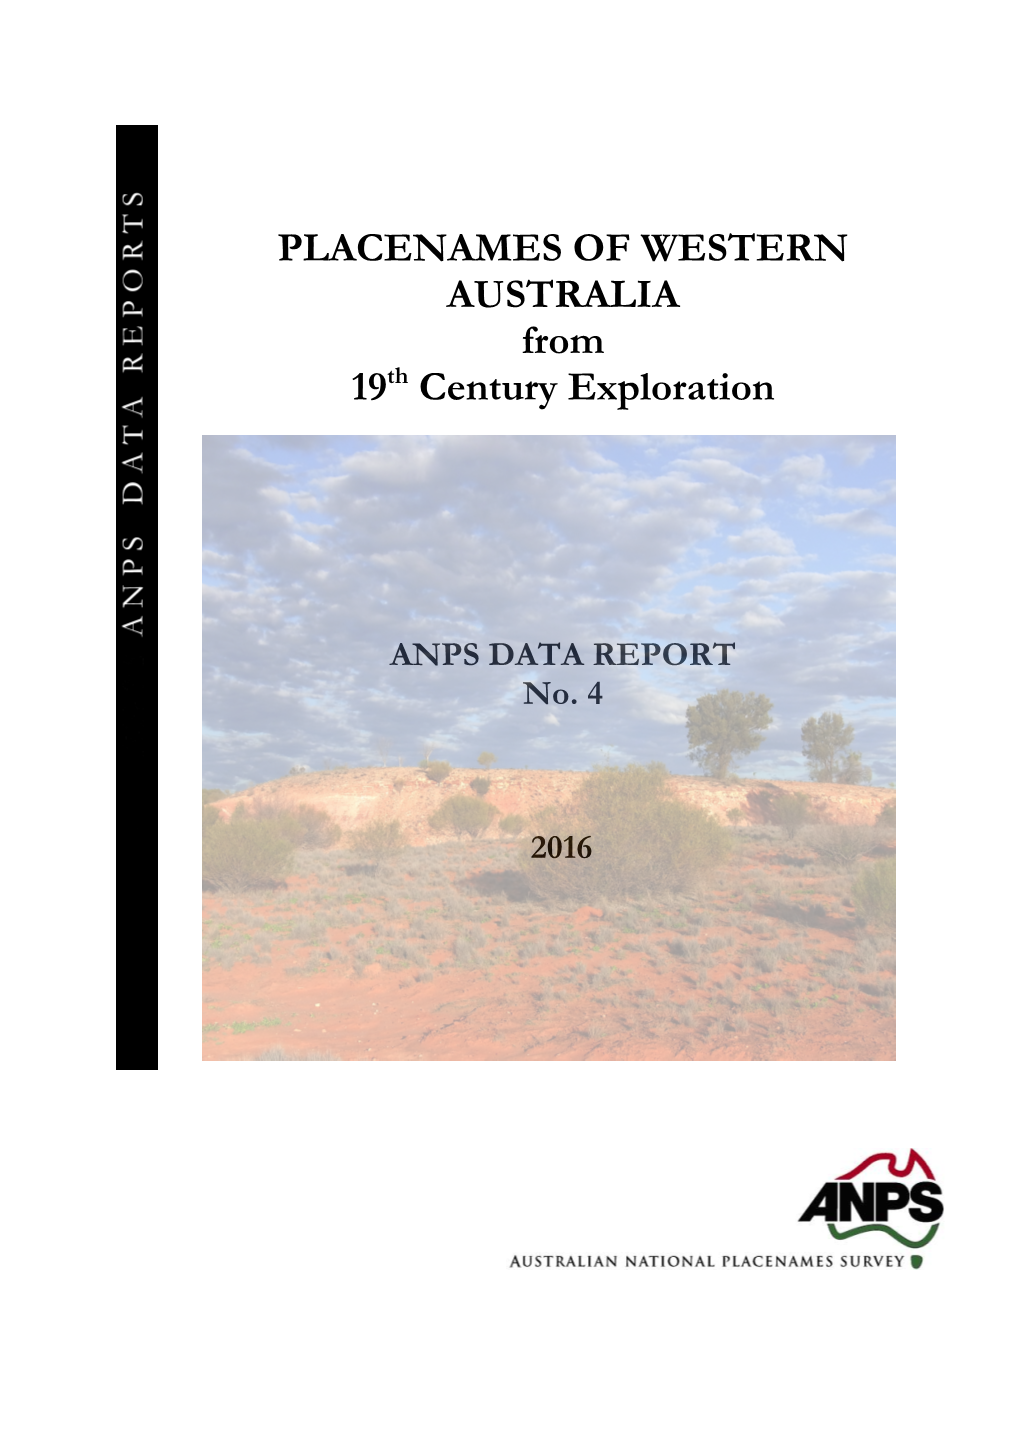 PLACENAMES of WESTERN AUSTRALIA from 19Th Century Exploration